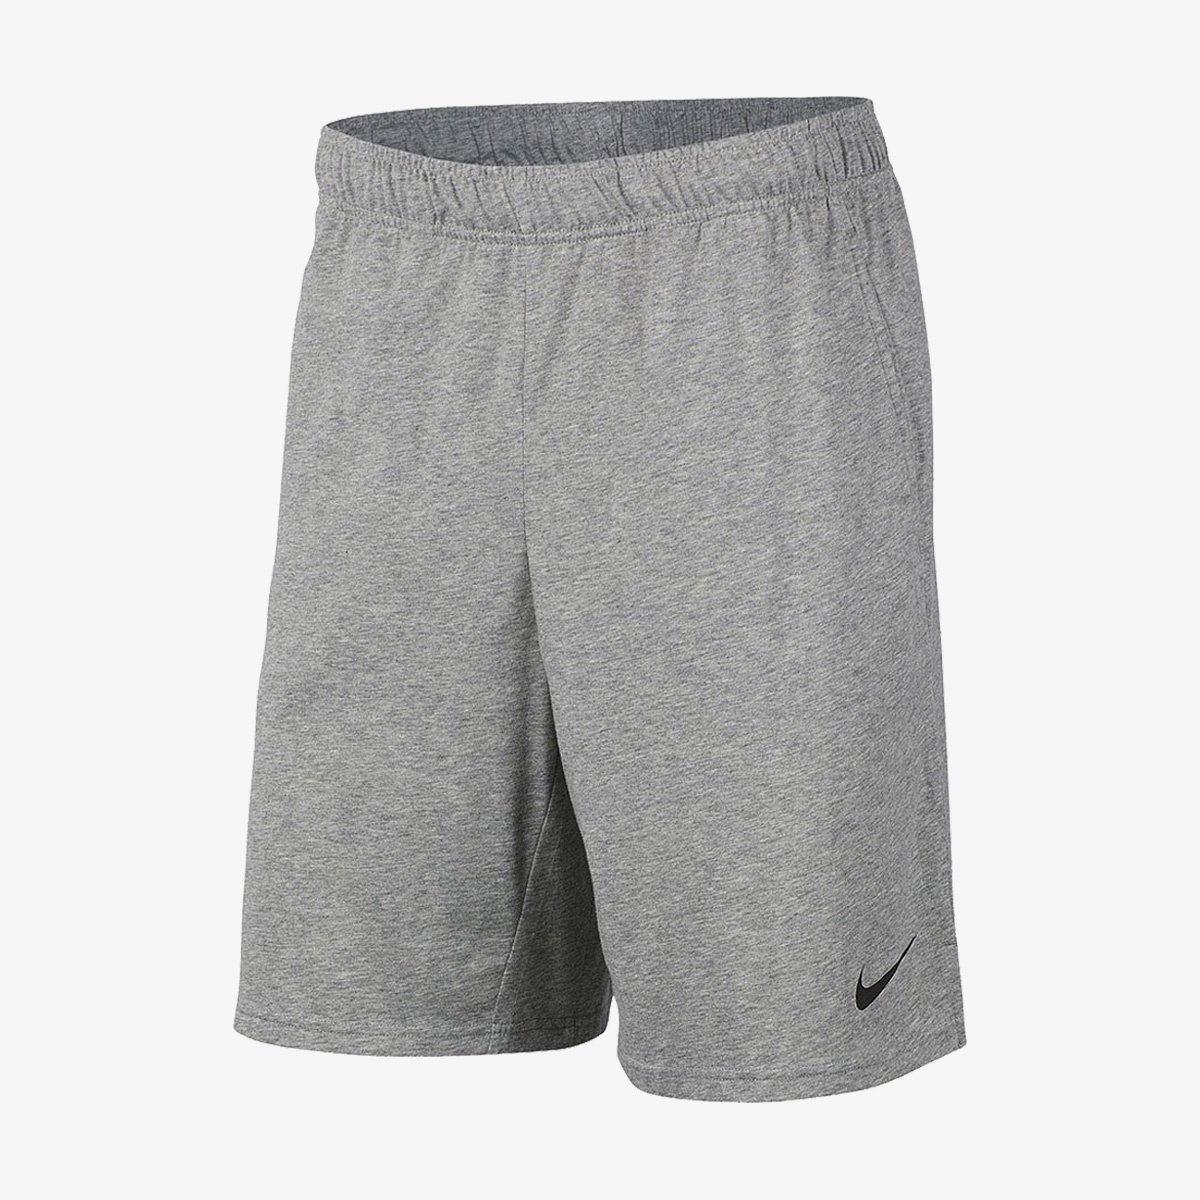 Nike M NK DRY FIT COTTON 2.0 